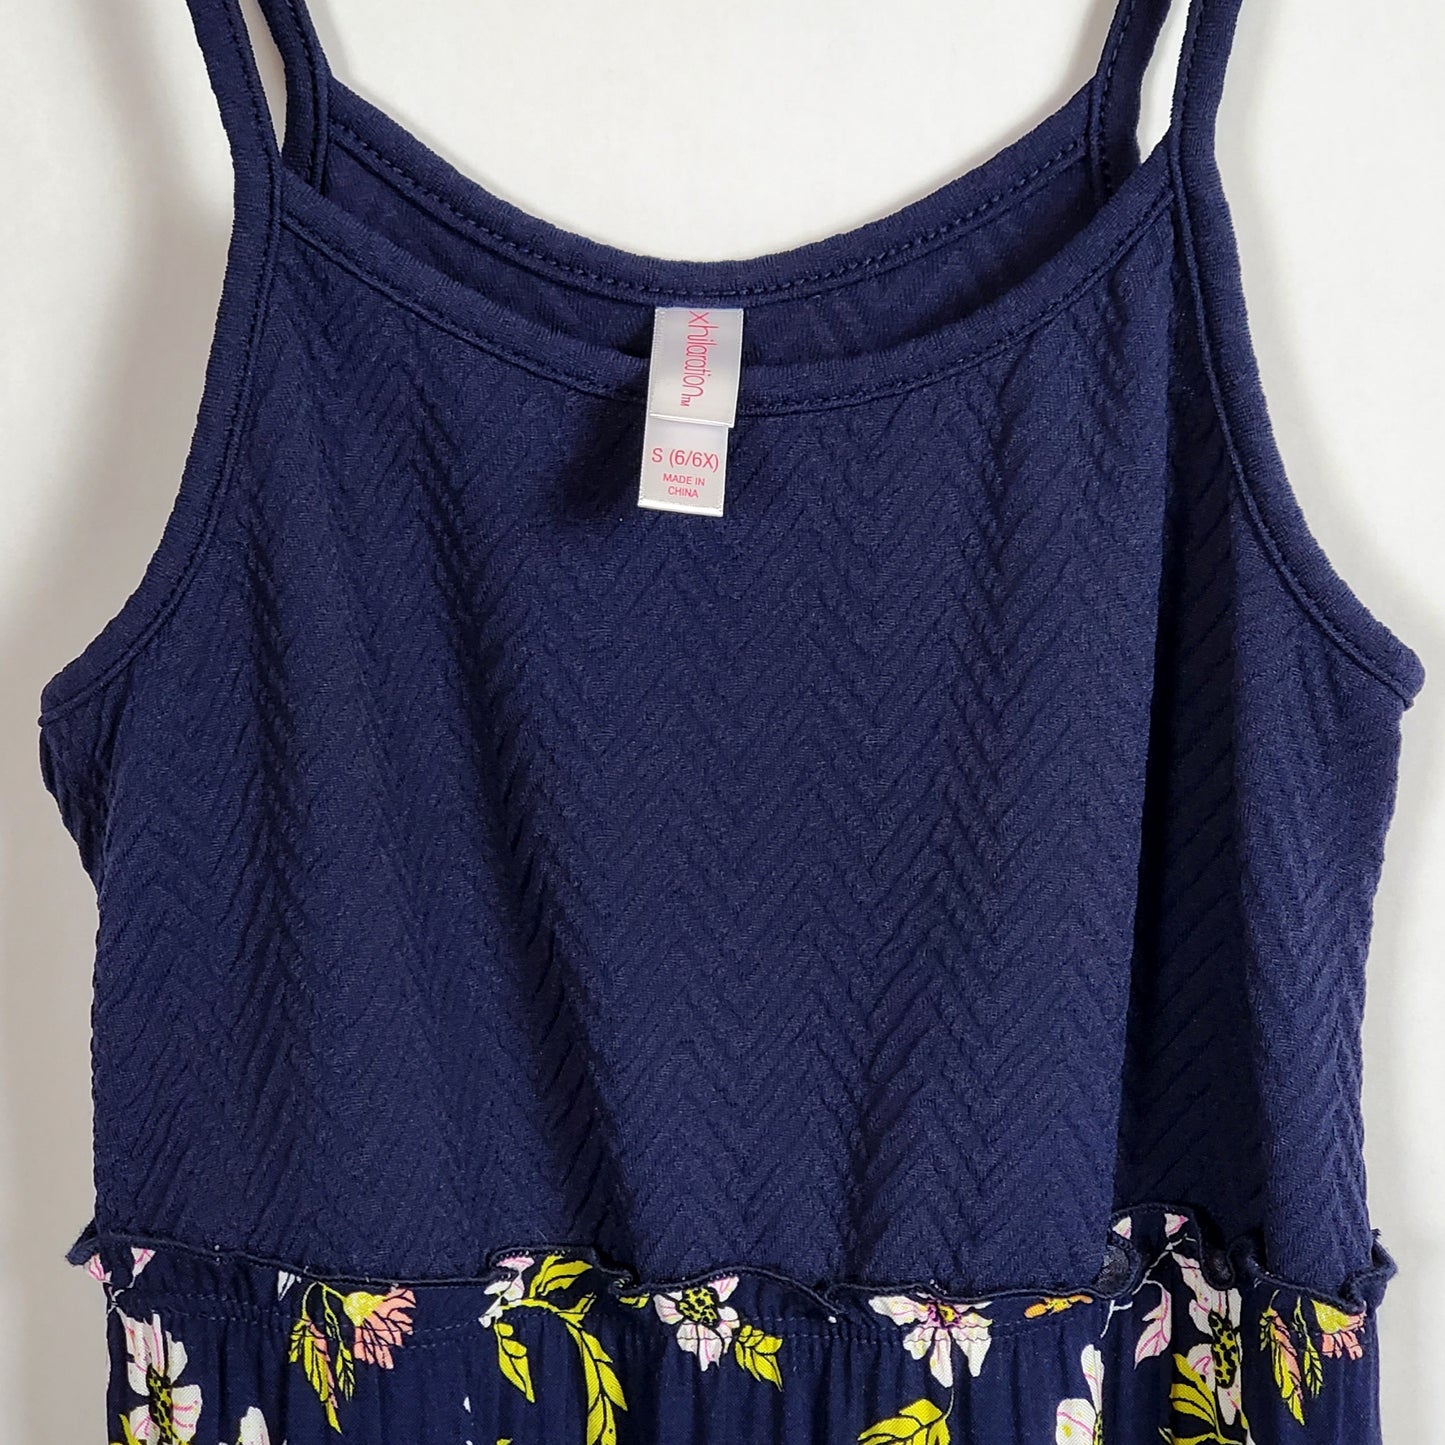 Xhilaration Girls Navy Blue Floral Dress Size 6 Used View 4